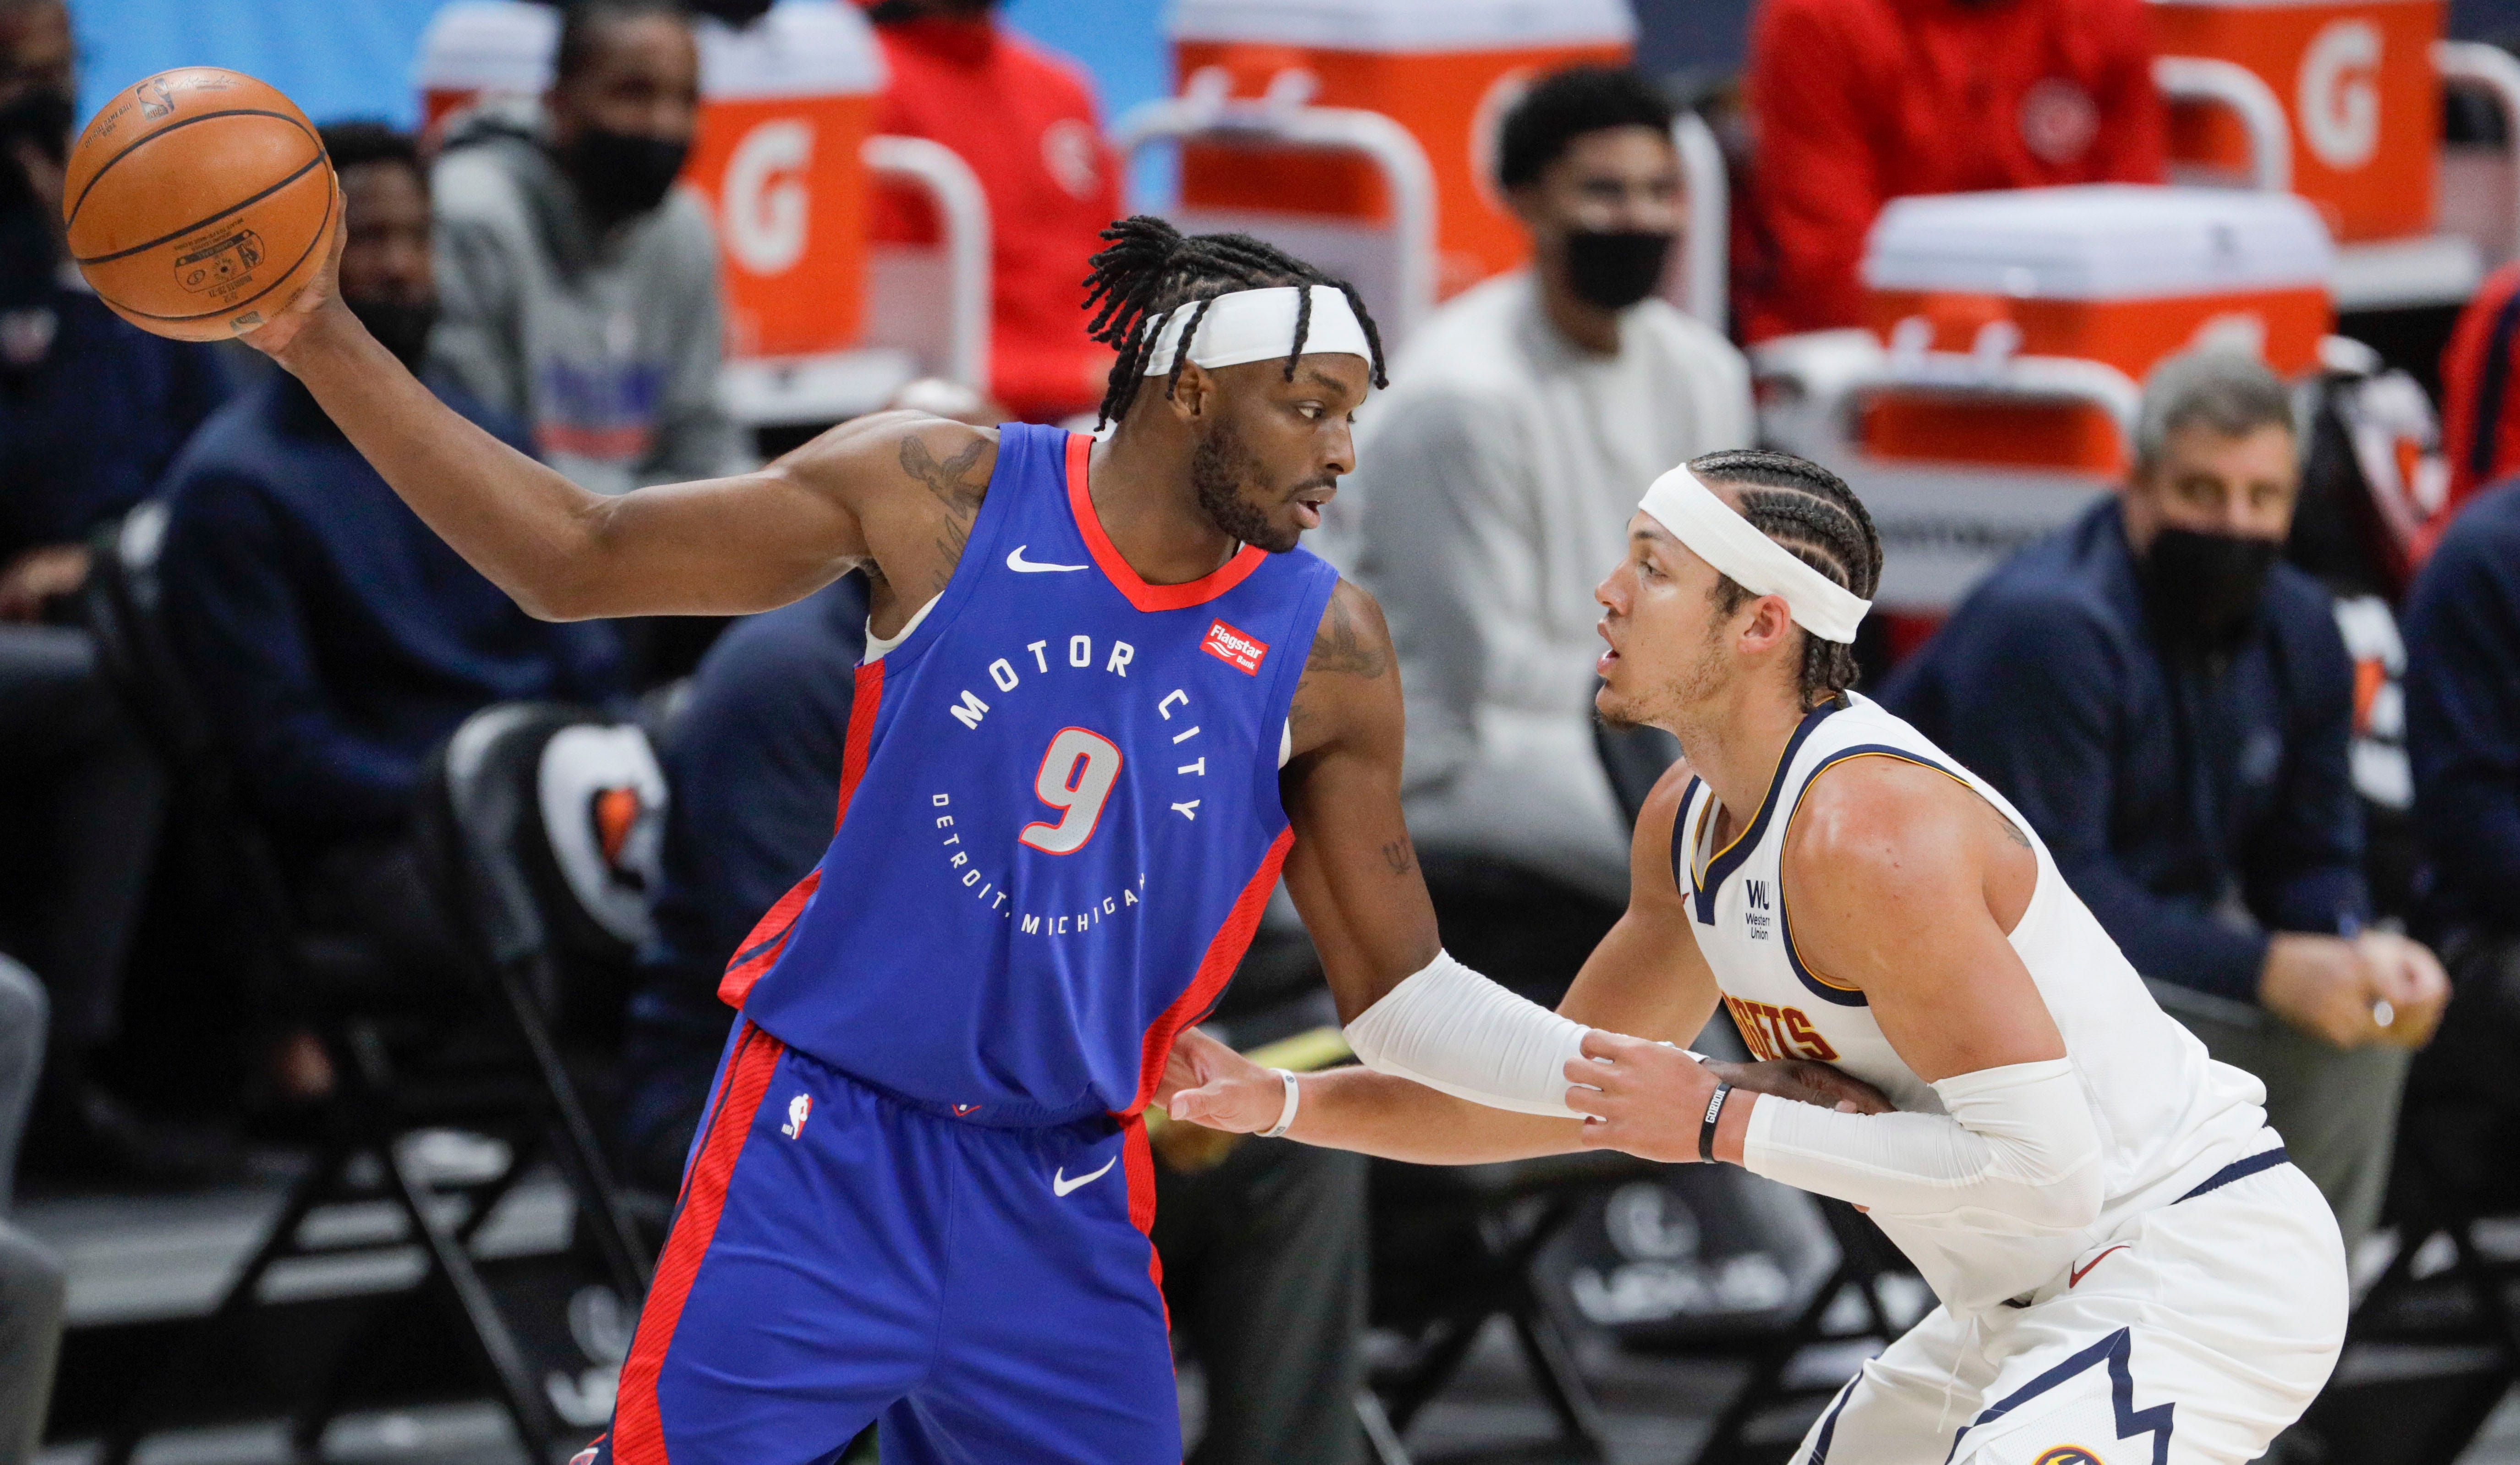 Detroit Pistons forward Jerami Grant (9) holds the ball away from Denver Nuggets forward Aaron Gordon (50) in the first quarter of an NBA basketball game in Denver, Tuesday, April 6, 2021.